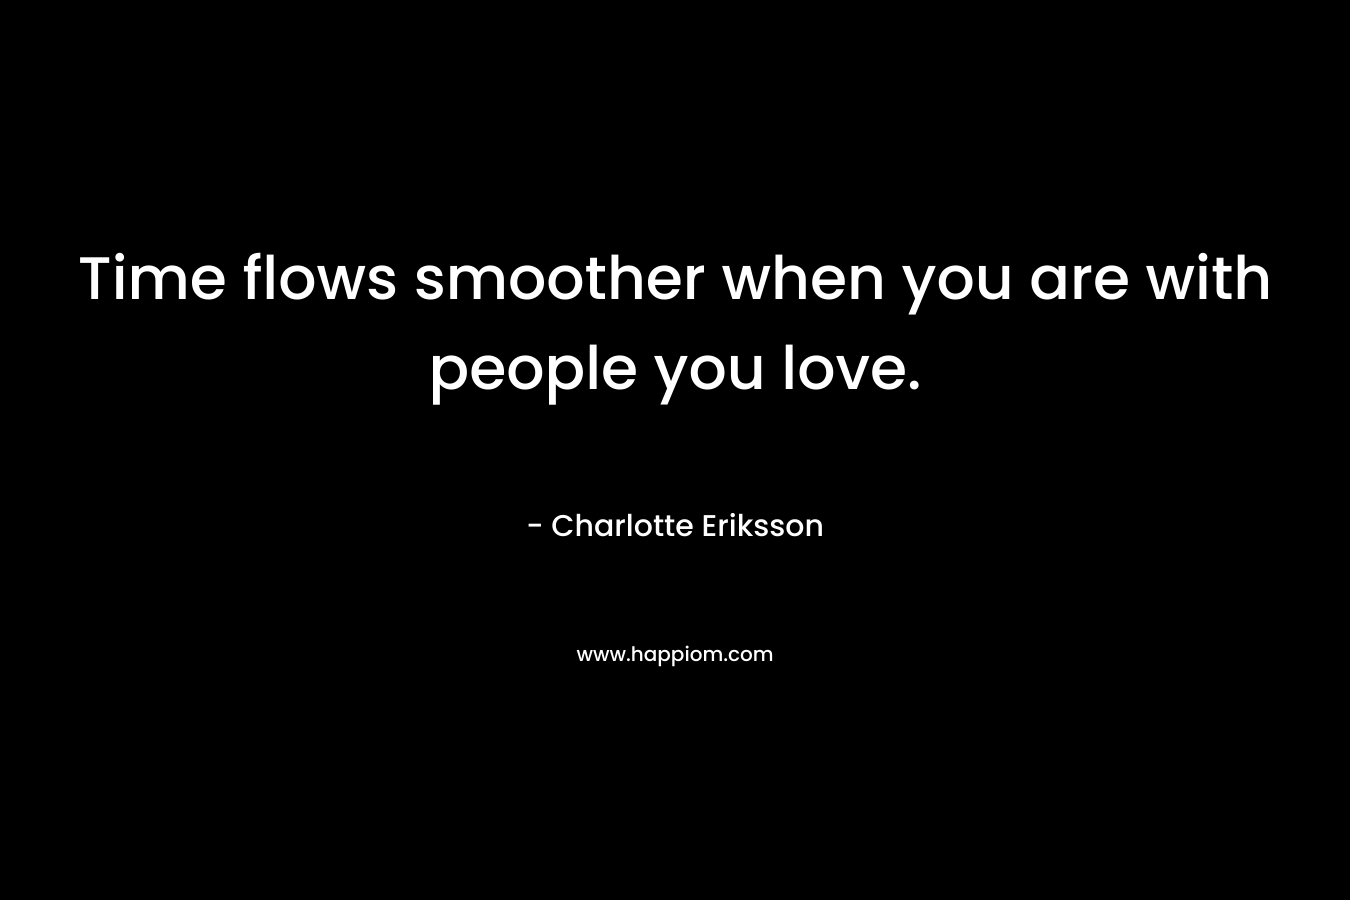 Time flows smoother when you are with people you love.